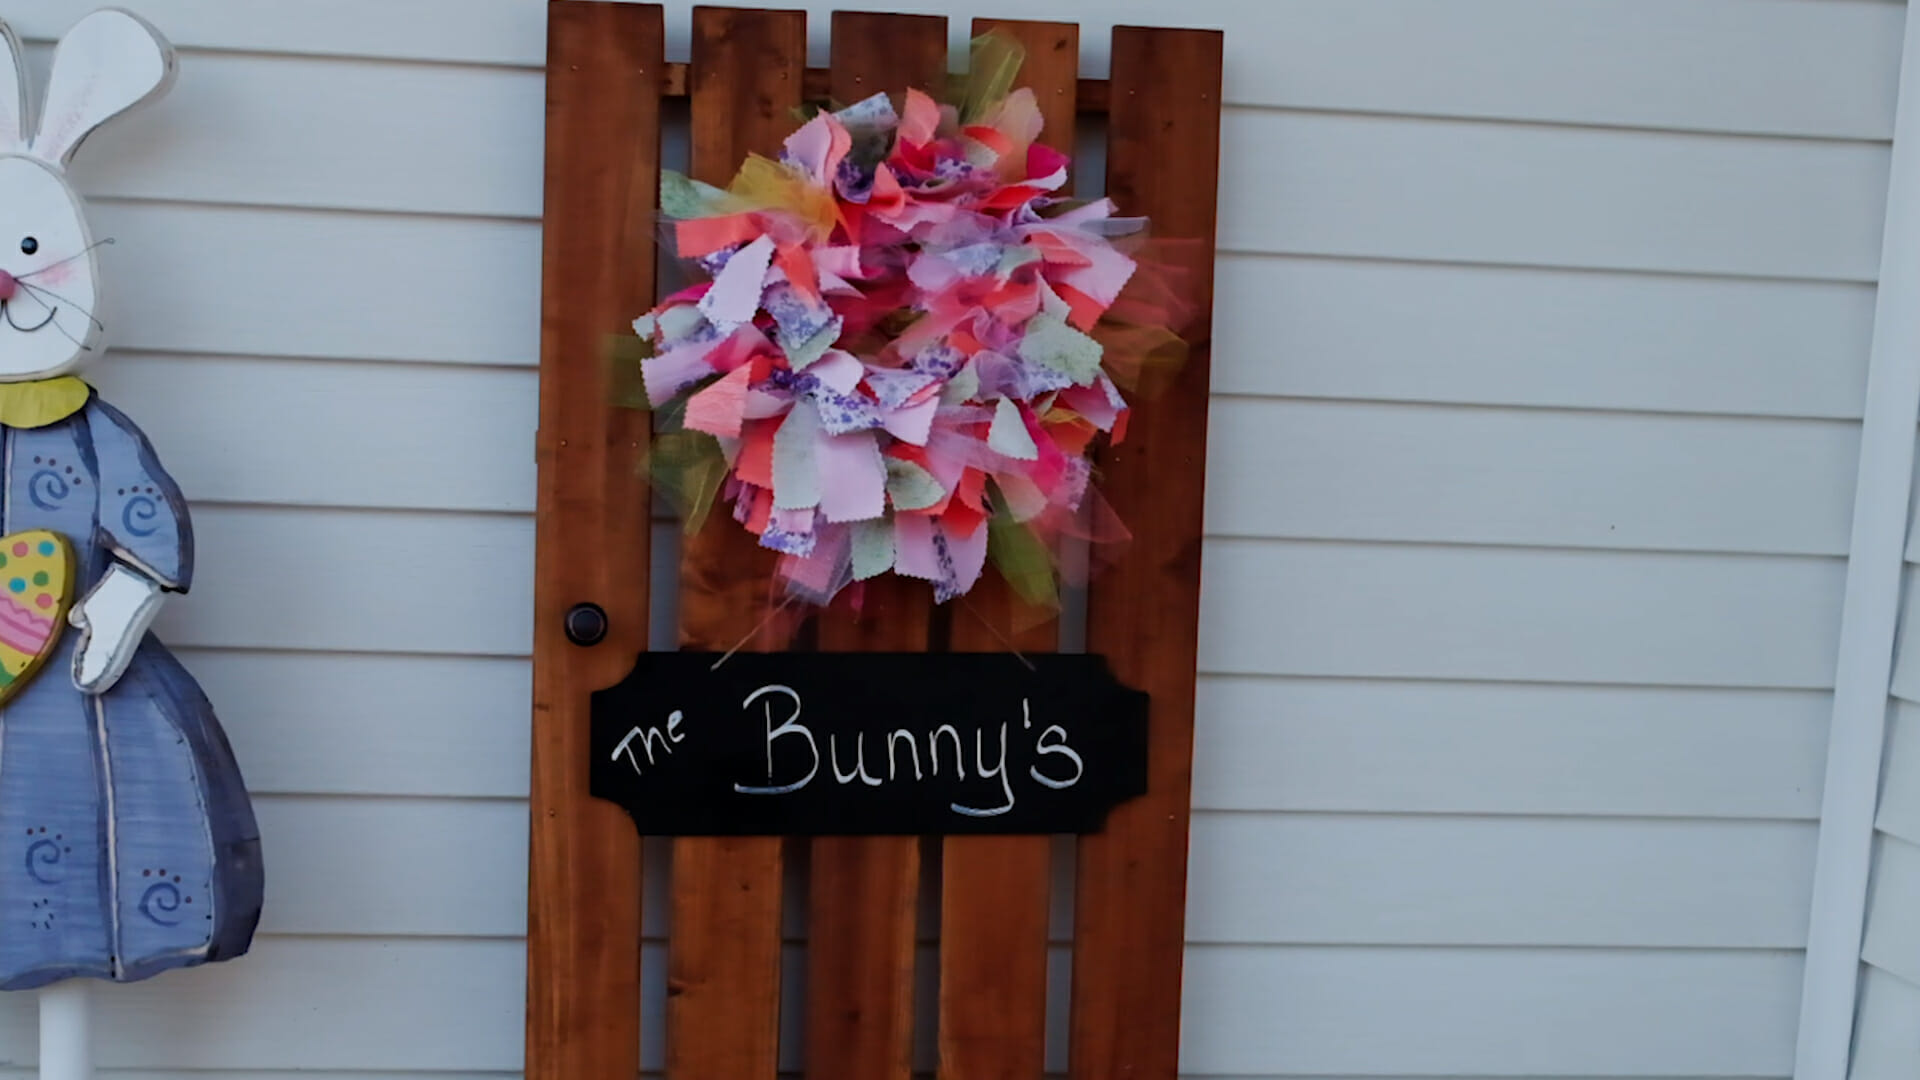 A wood fence section leaning against house siding, with a colorful rag wreath and a sign for The Bunny's.